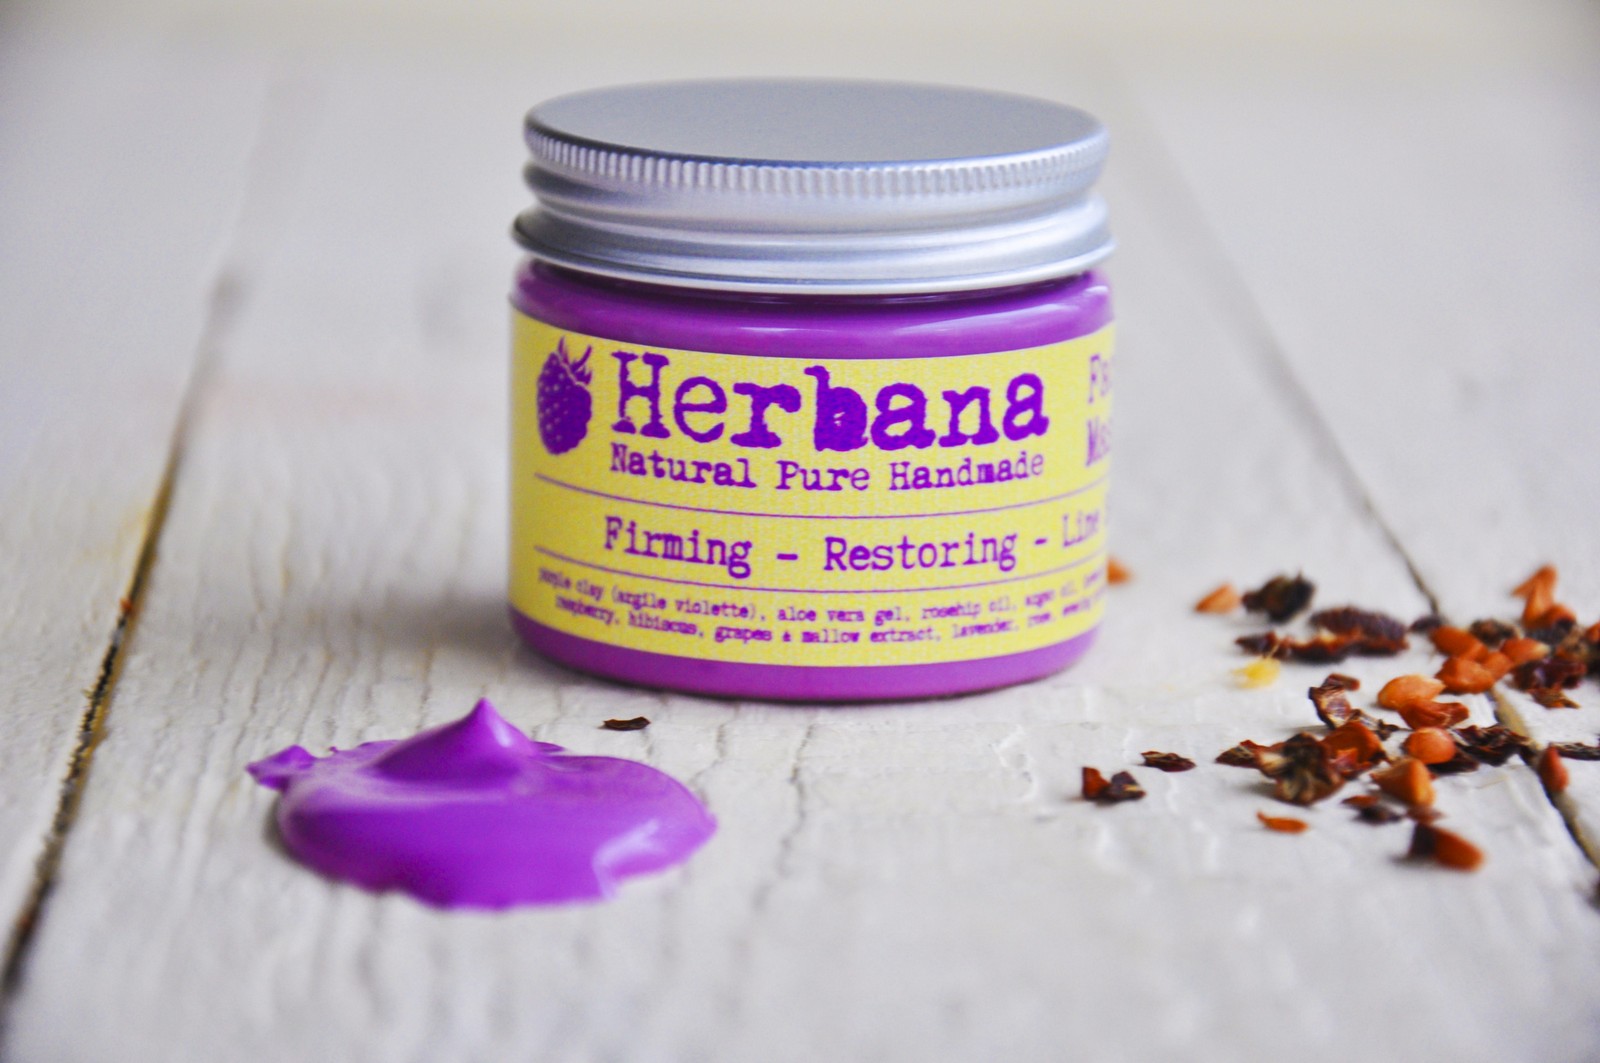 Purple Clay Firming Face Mask